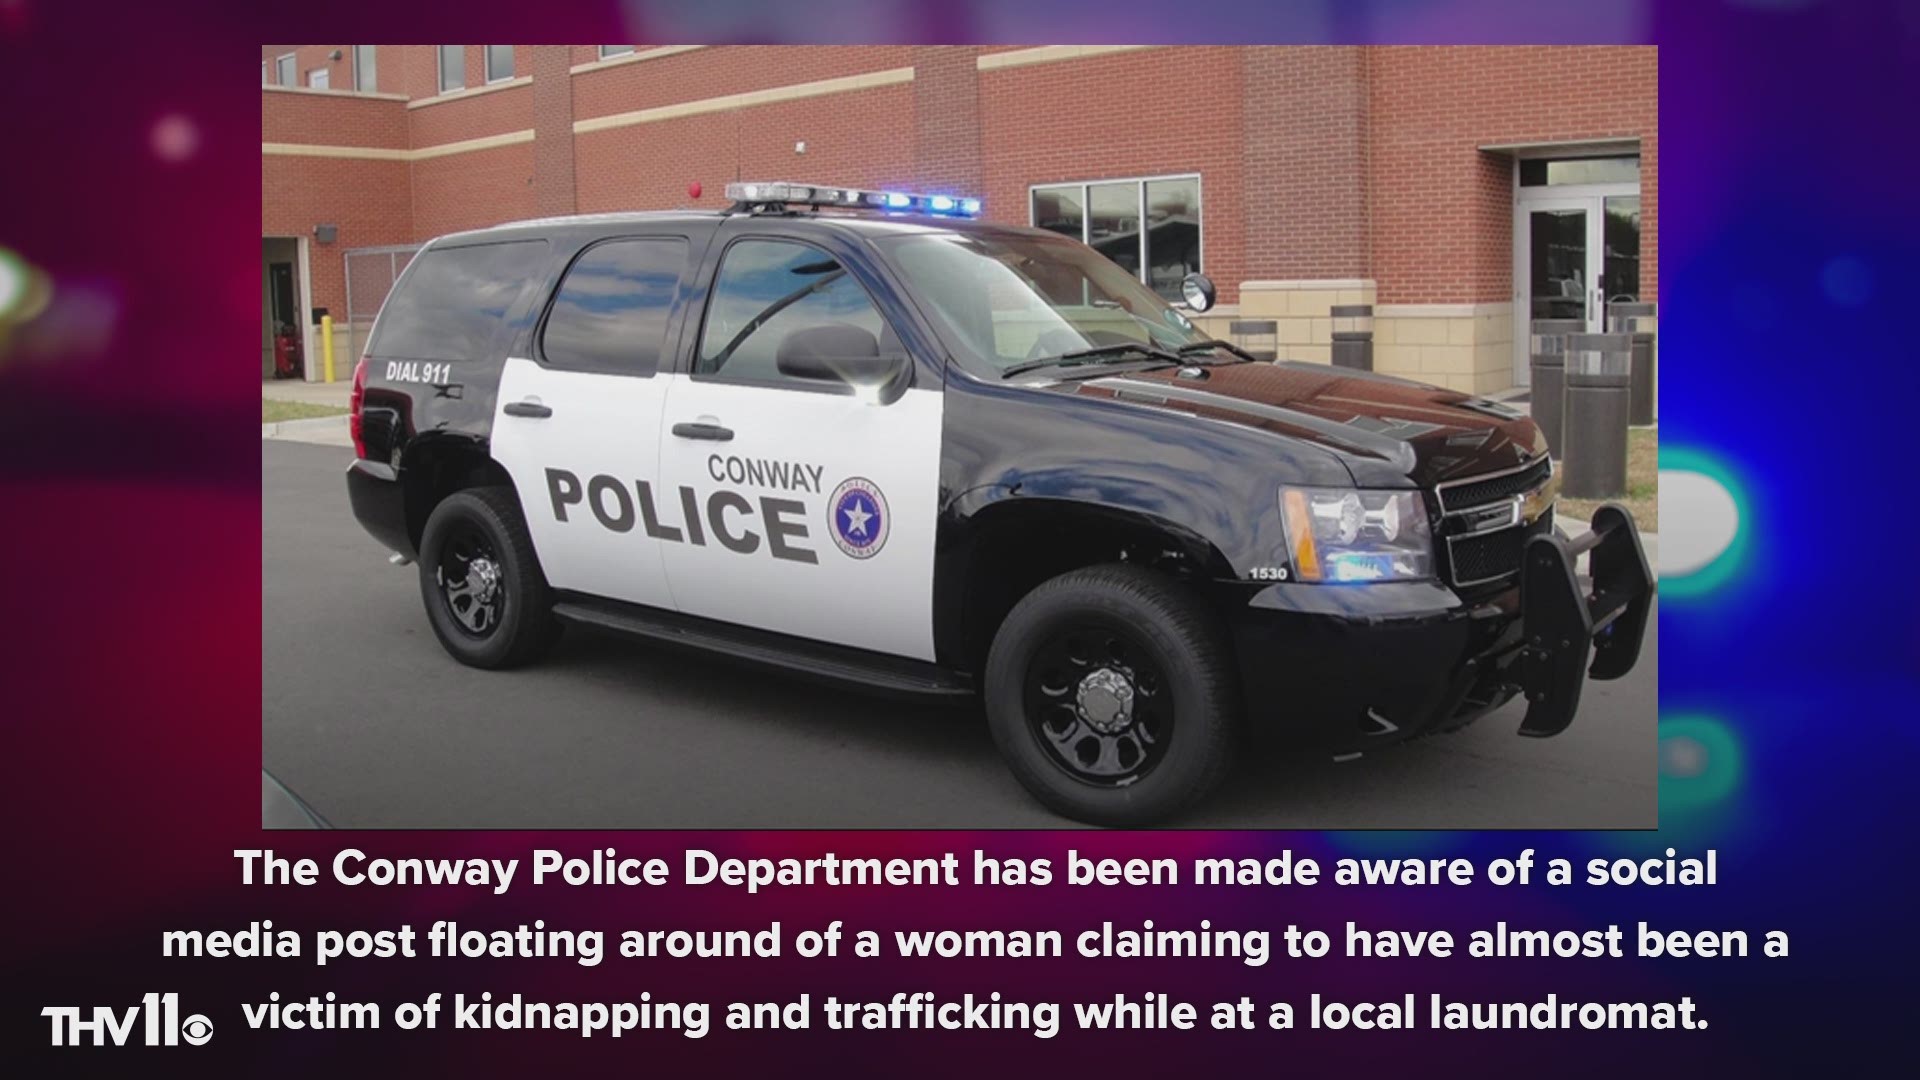 The Conway Police Department has been made aware of a social media post floating around of a woman claiming to have almost been a victim of kidnapping/trafficking.